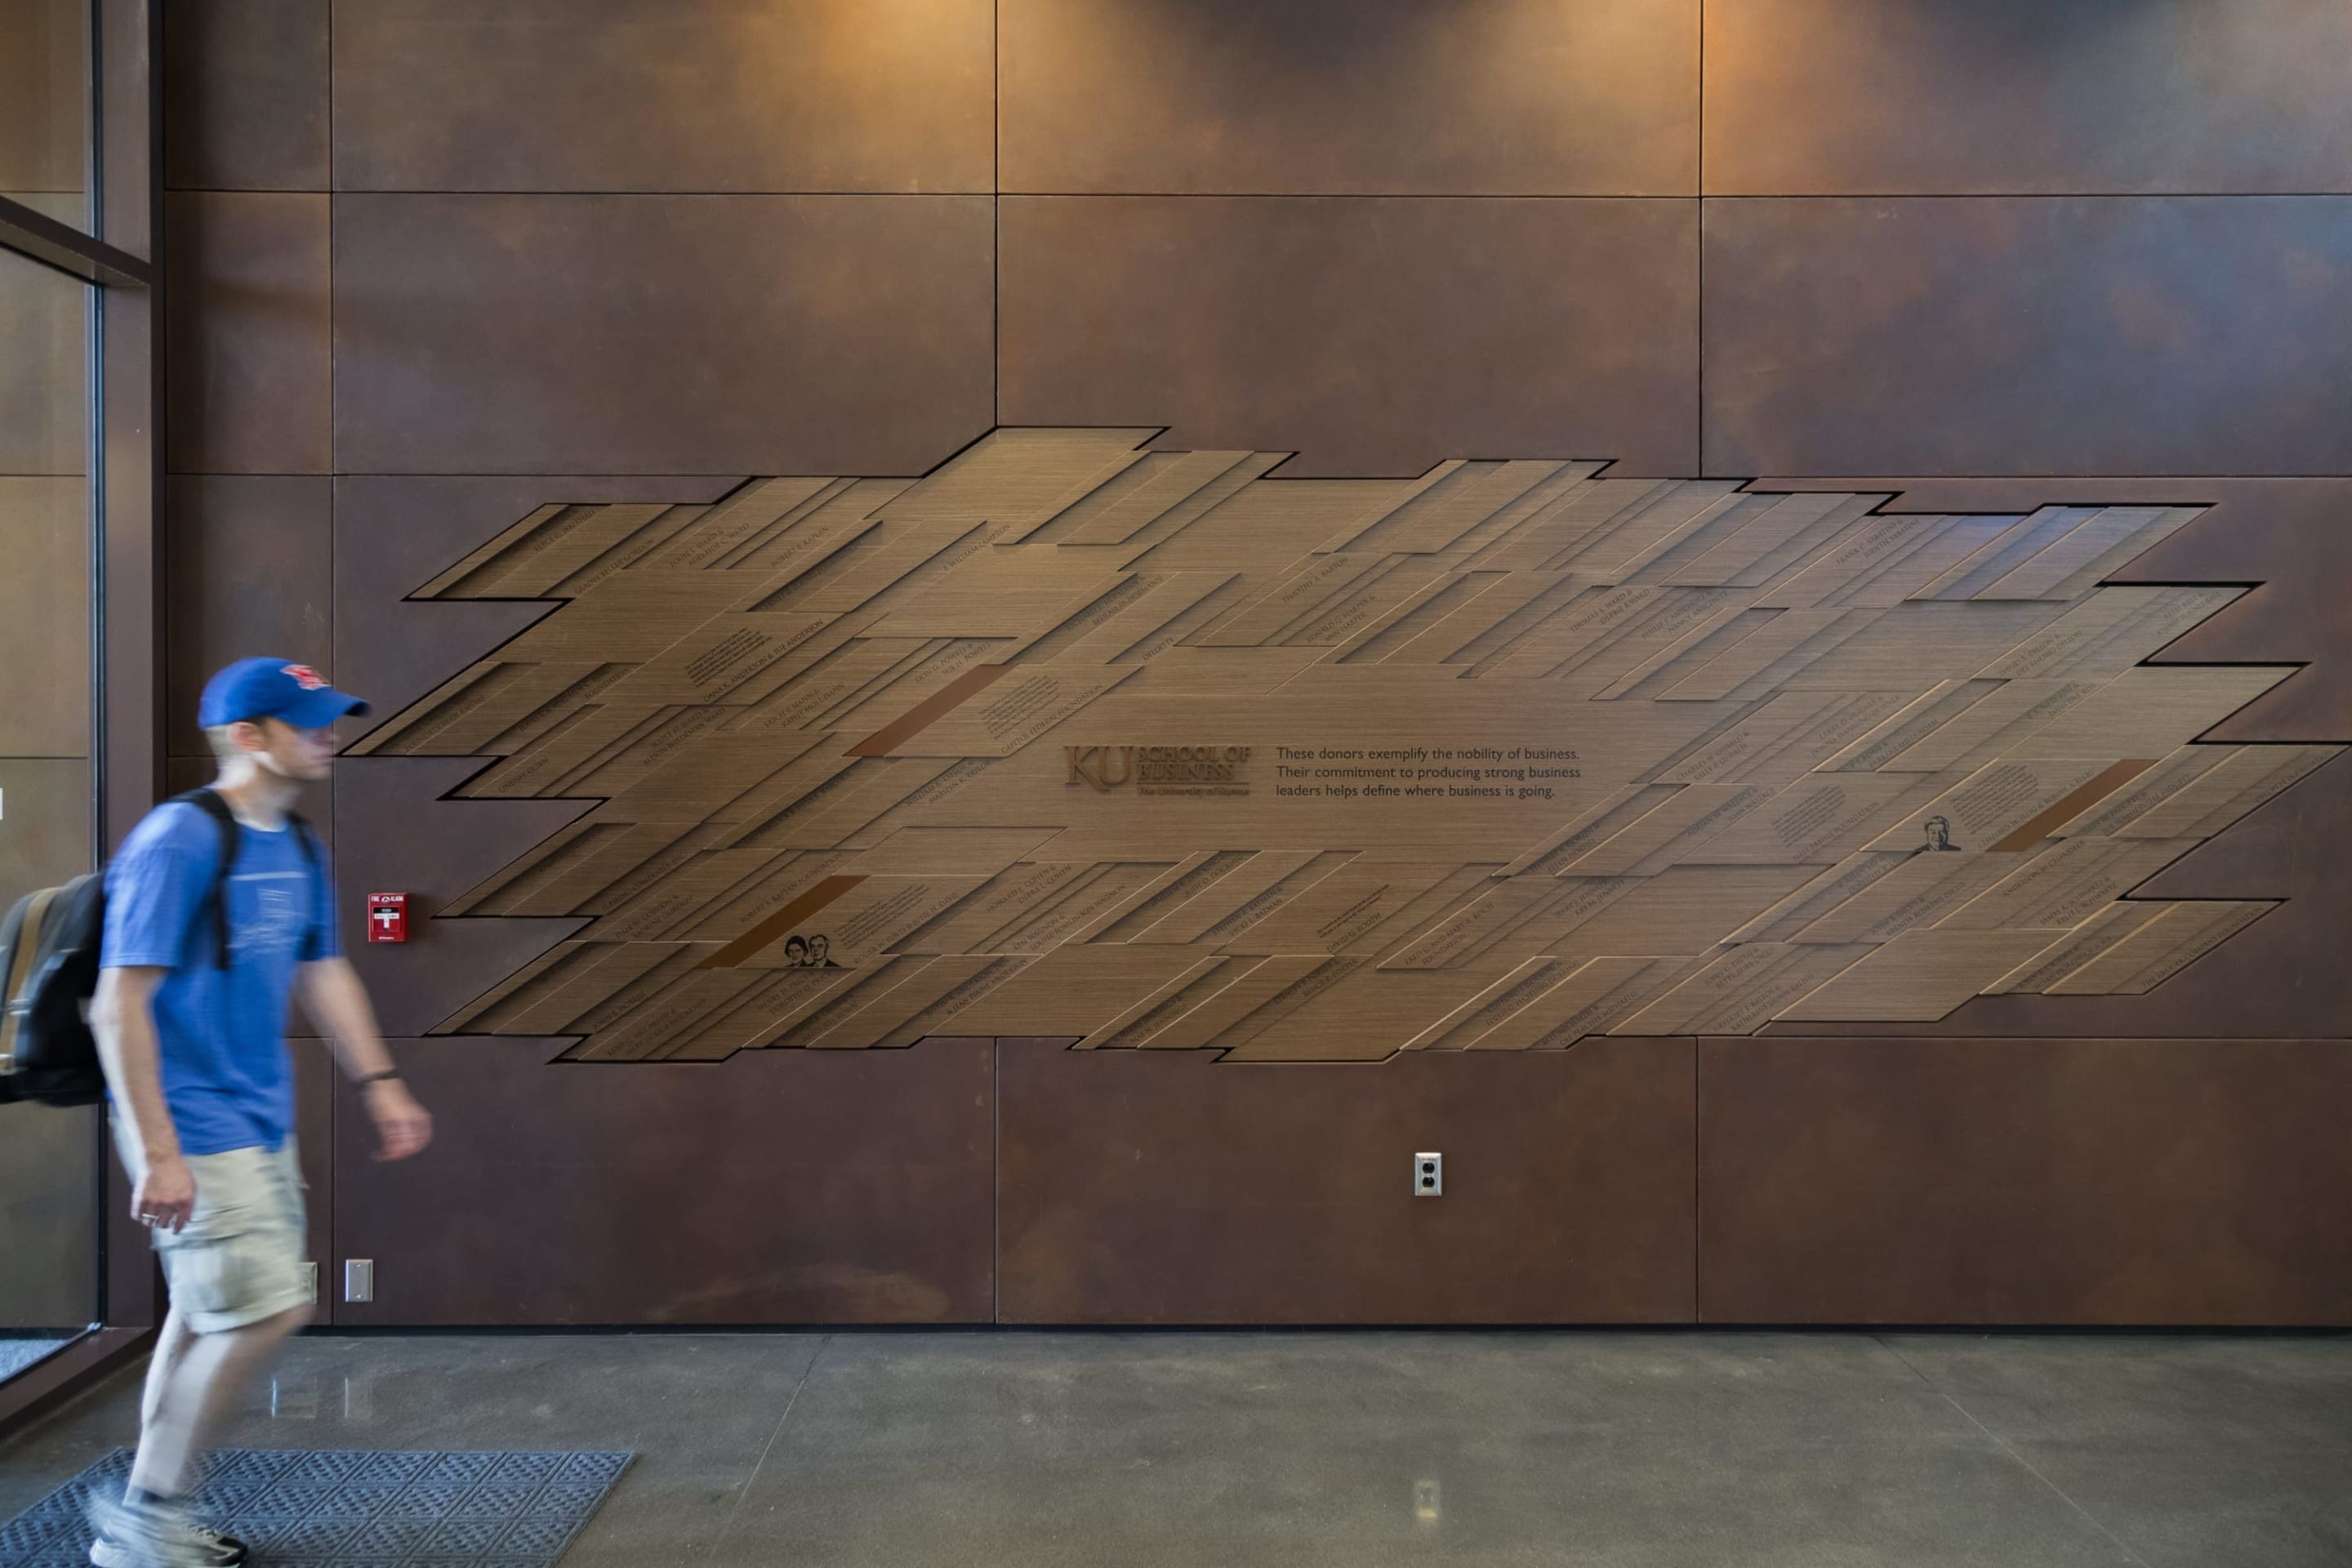 Solanum weathering steel artwall in the entryway of Capitol Federal Hall at the University of Kansas.